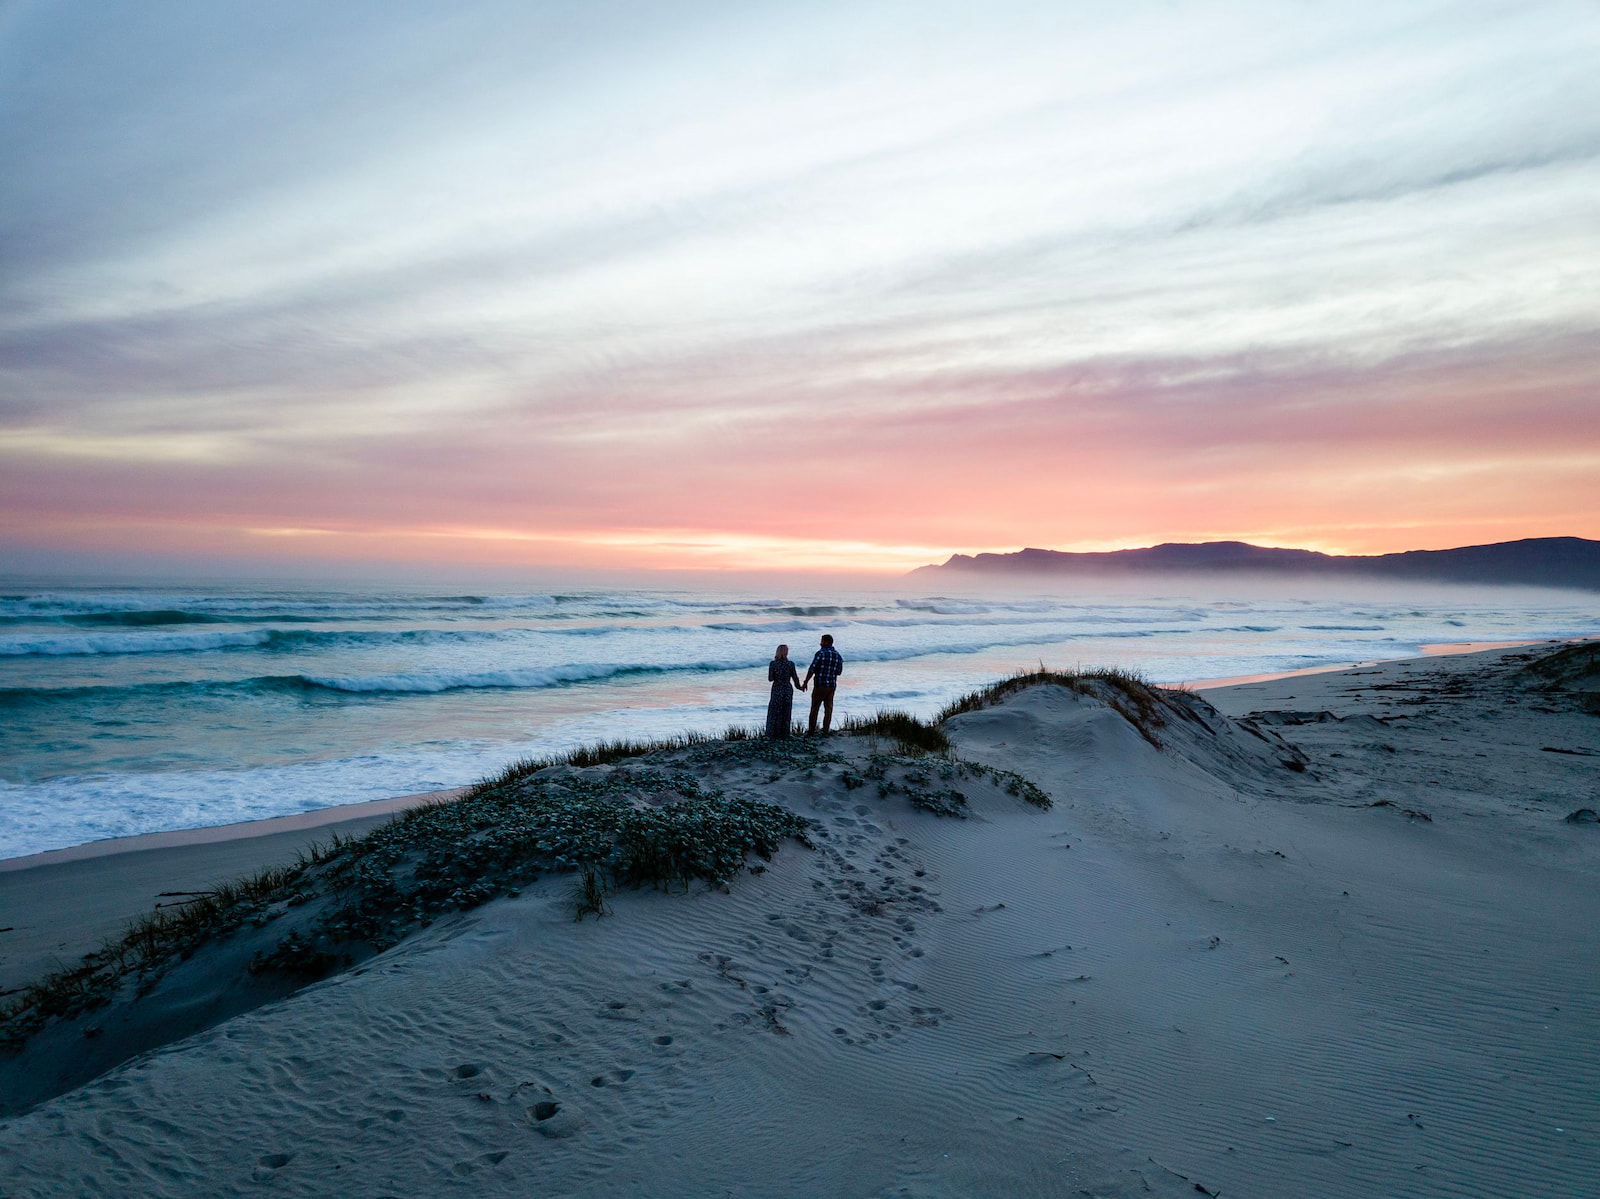 Secluded beach sundowners, Walker bay nature reserve